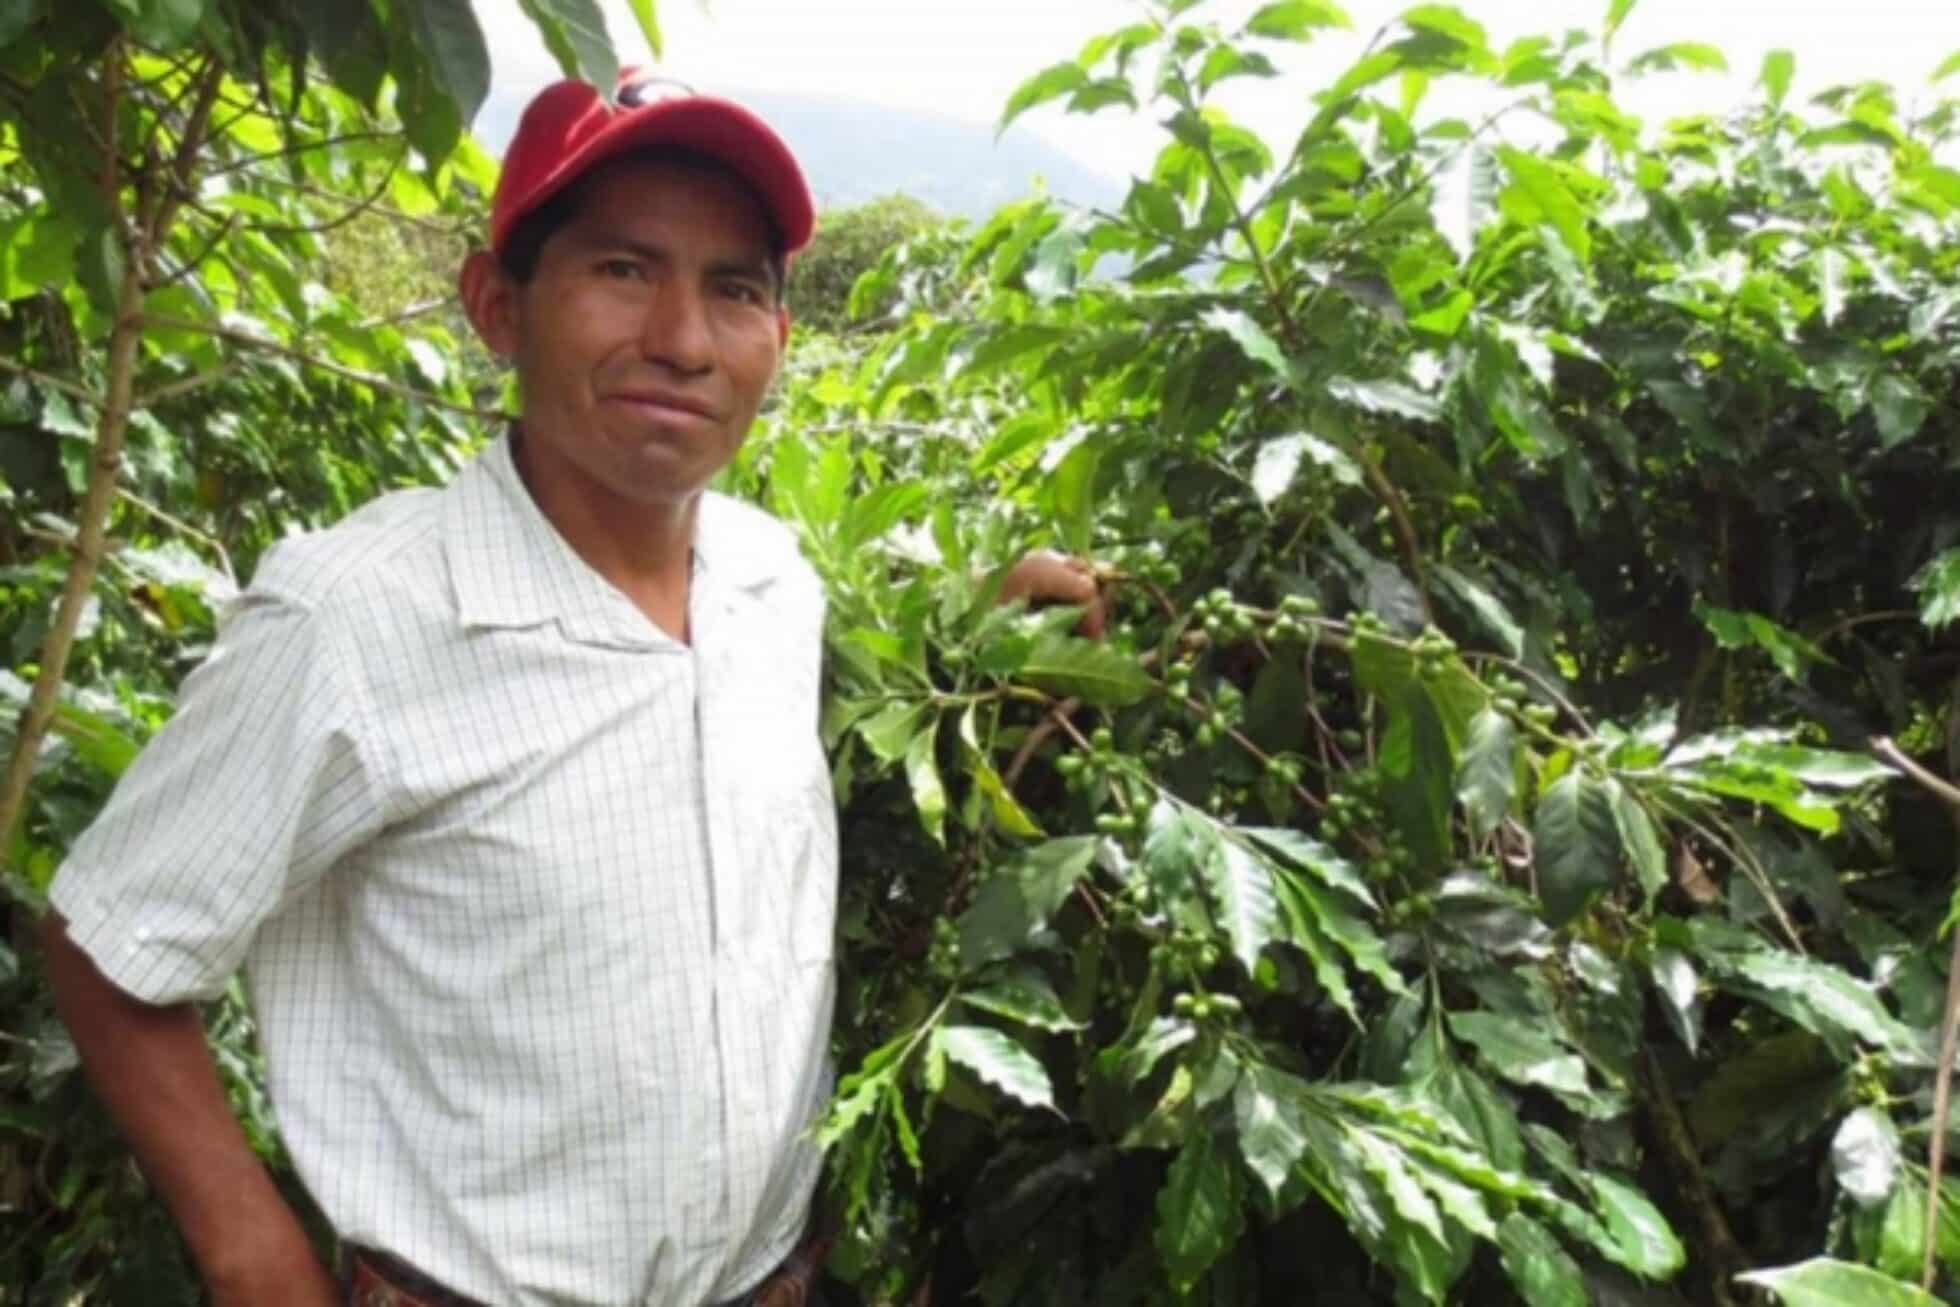 Improving Rural Livelihoods: A Study of Four Guatemalan Coffee Cooperatives